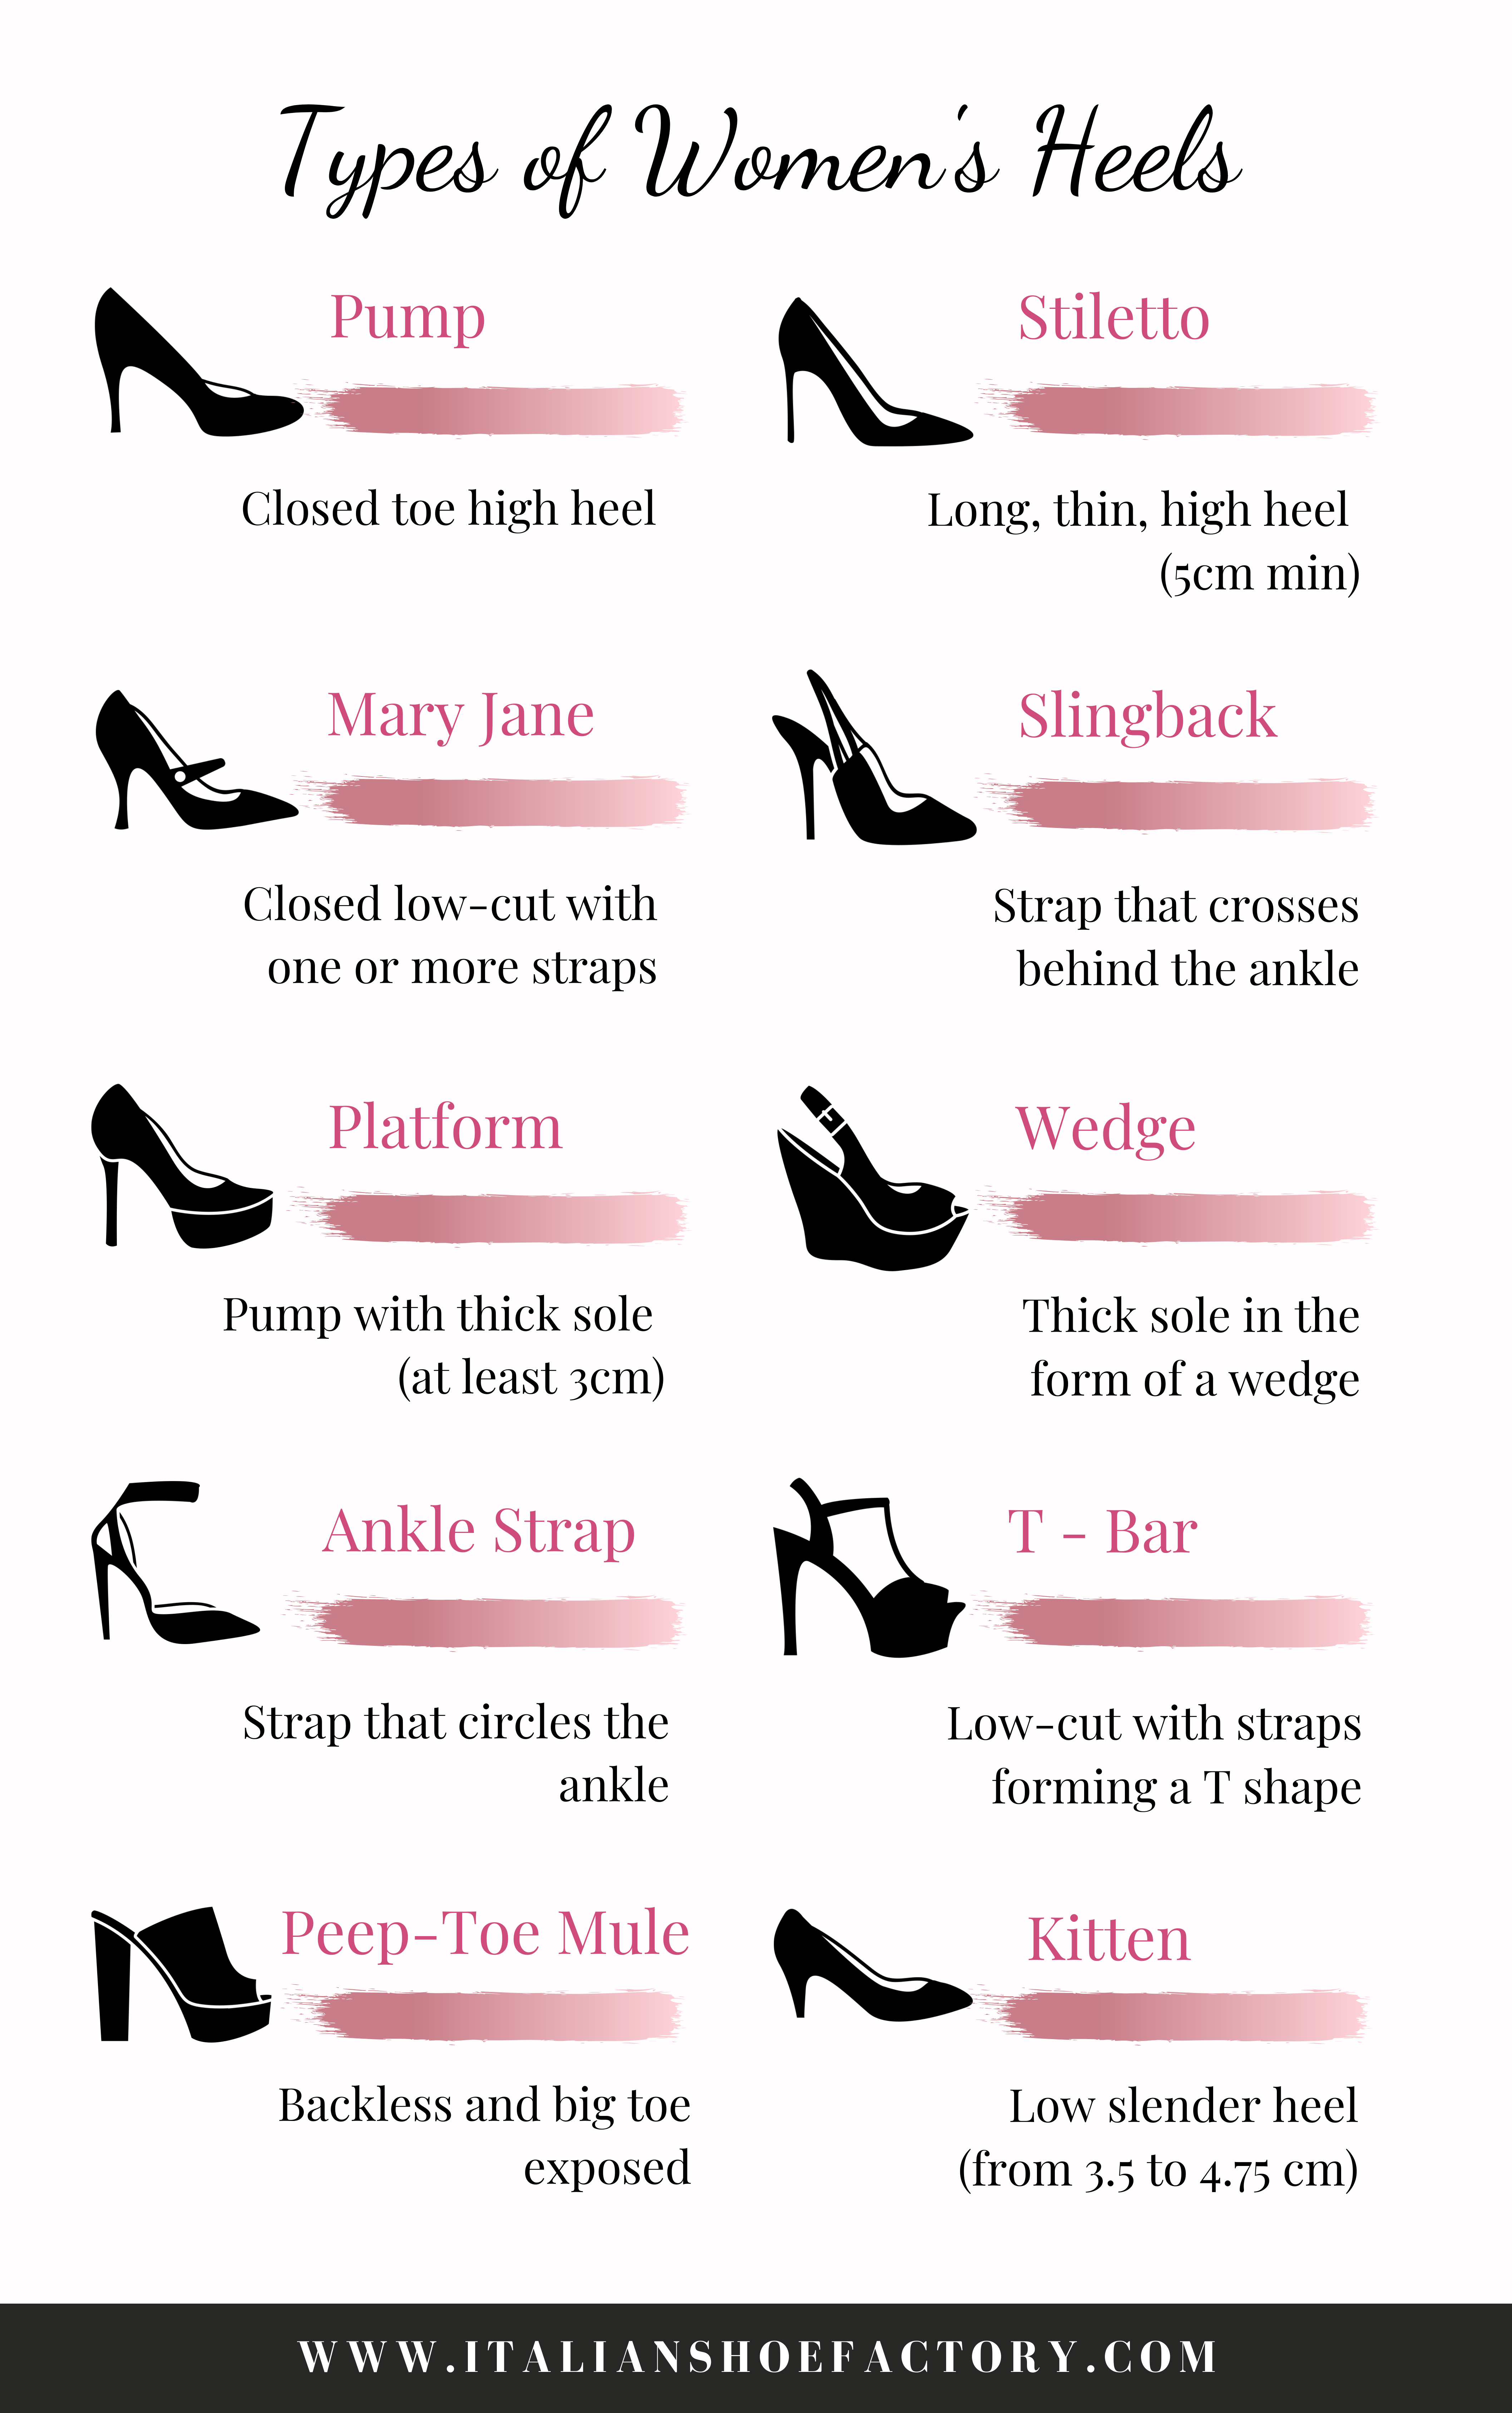 heels-and-more – Telegraph